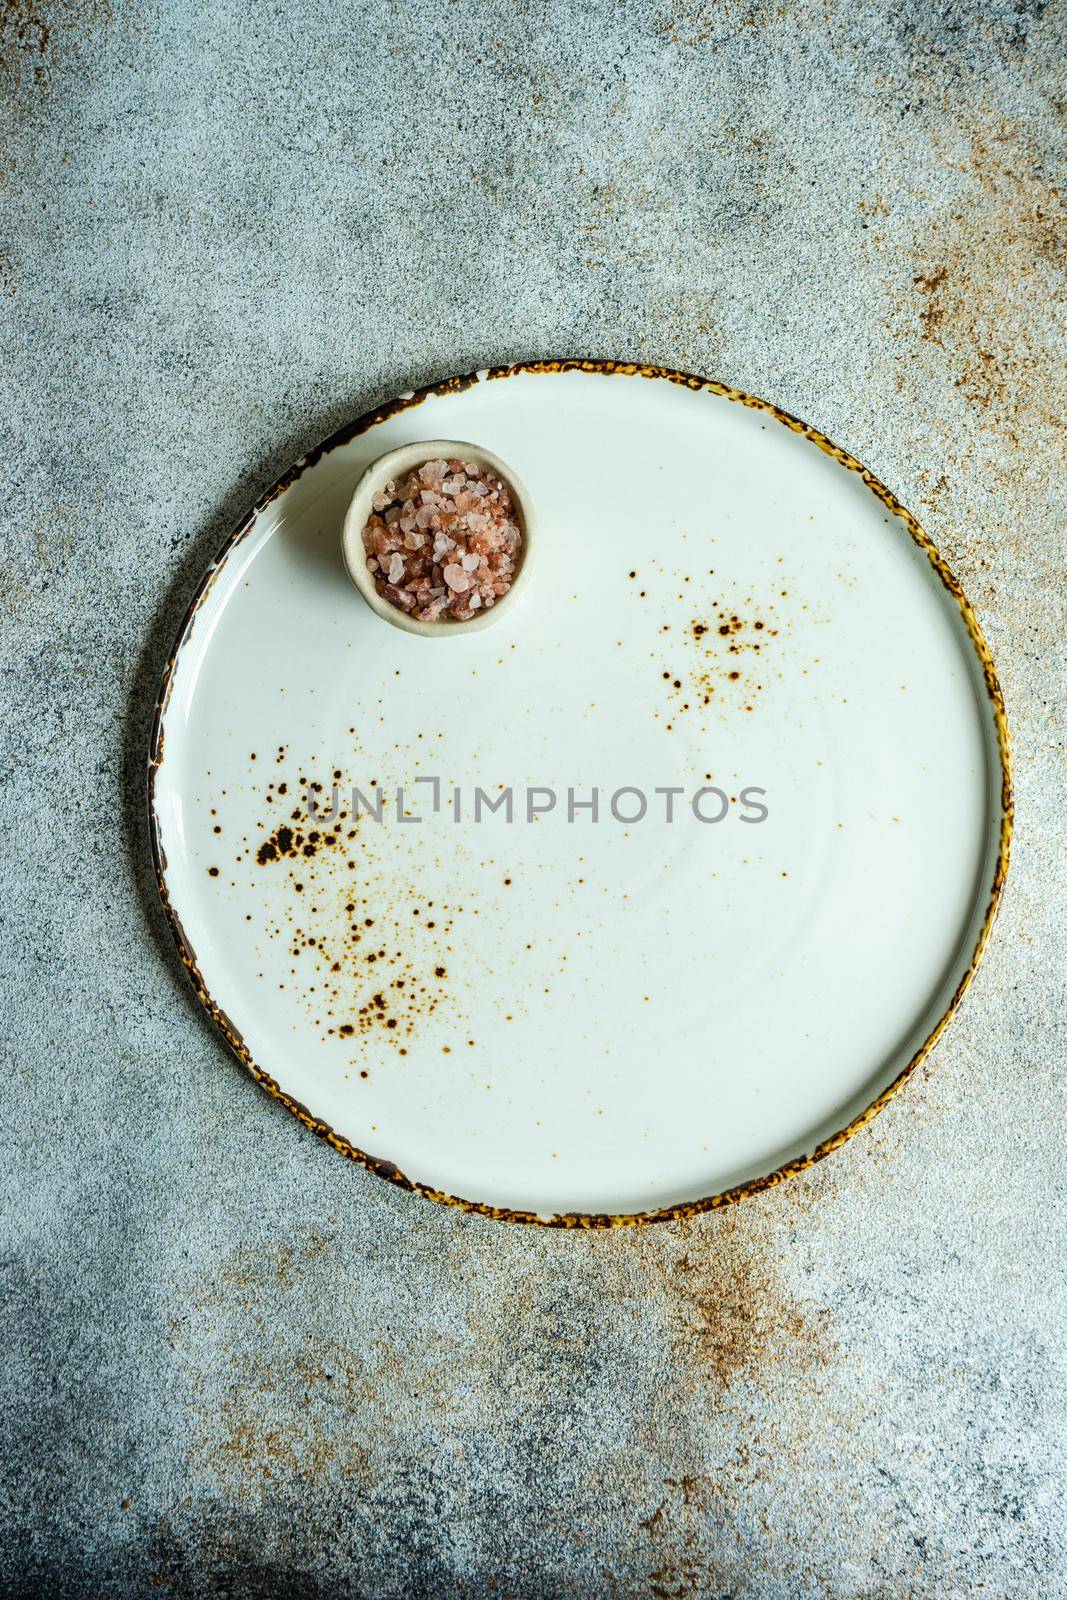 Table setting with salt by Elet